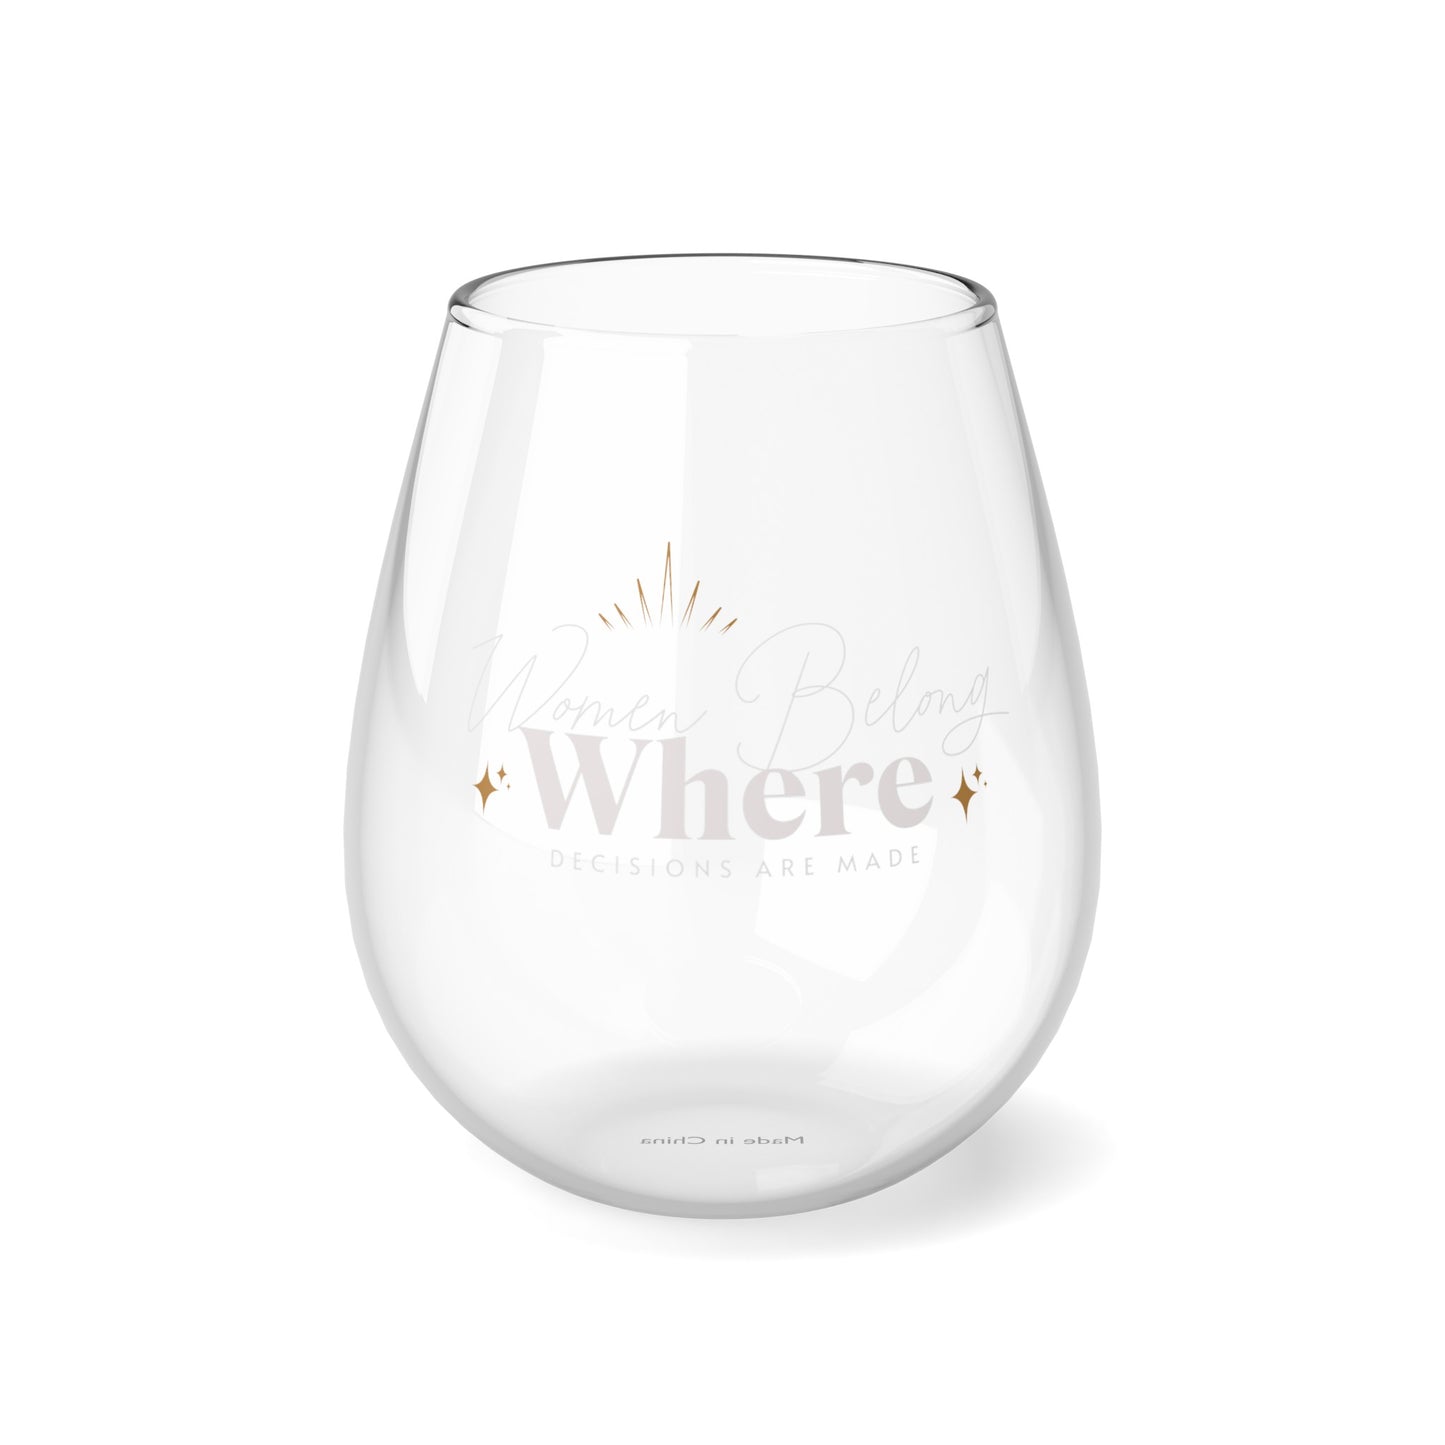 Design appears when you pour a dark drink "Women Belong Where Decisions Are Made" Stemless Wine Glass, 11.75oz